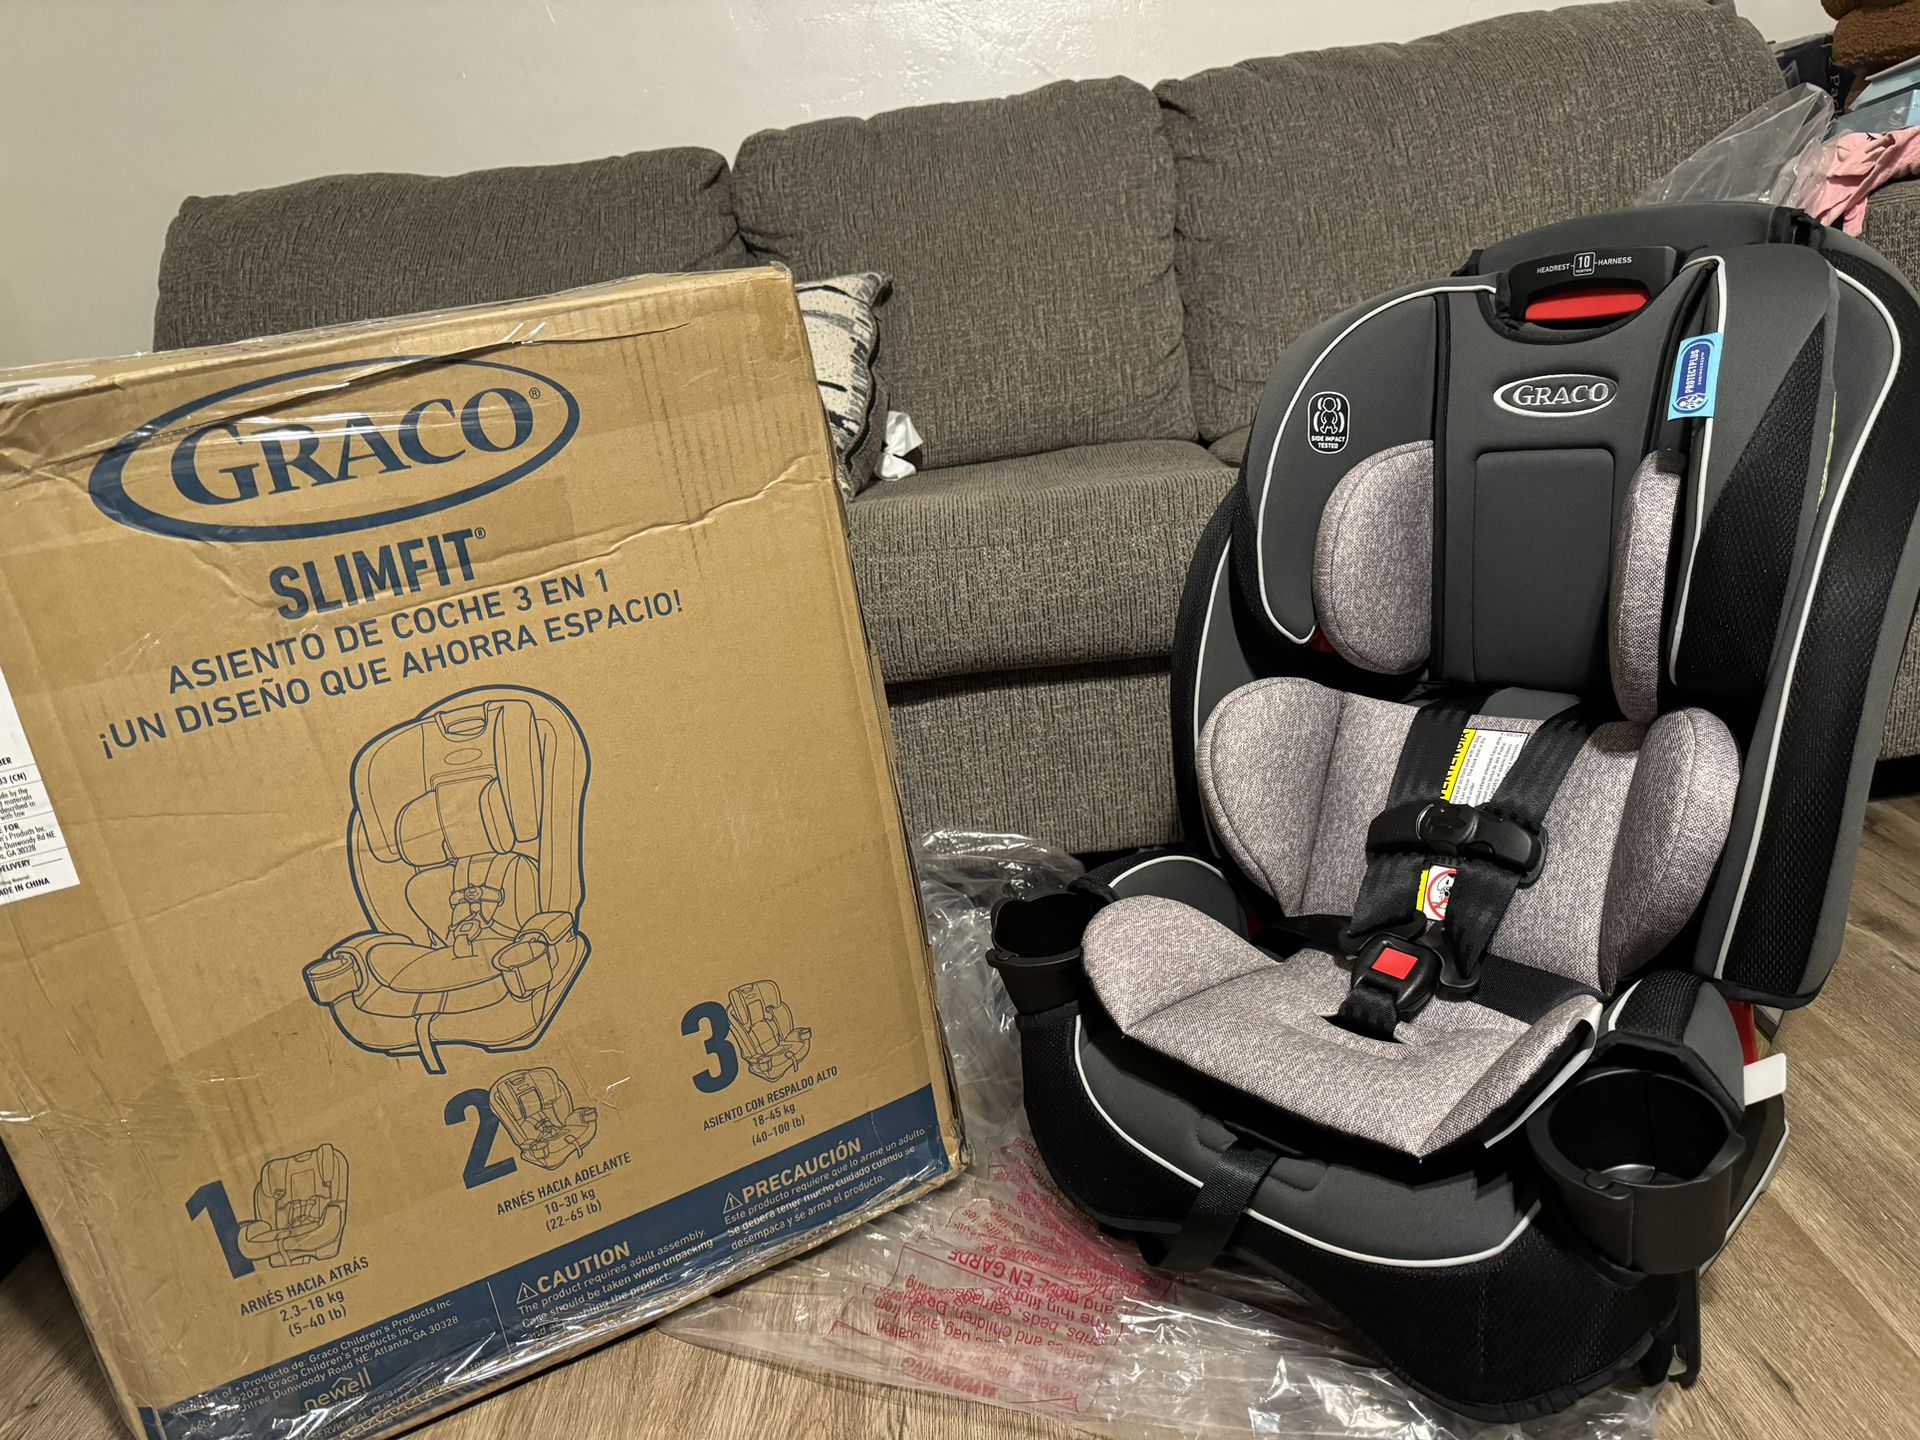 Graco 3-in-1 Slimfit All-In-One Convertible Car Seat